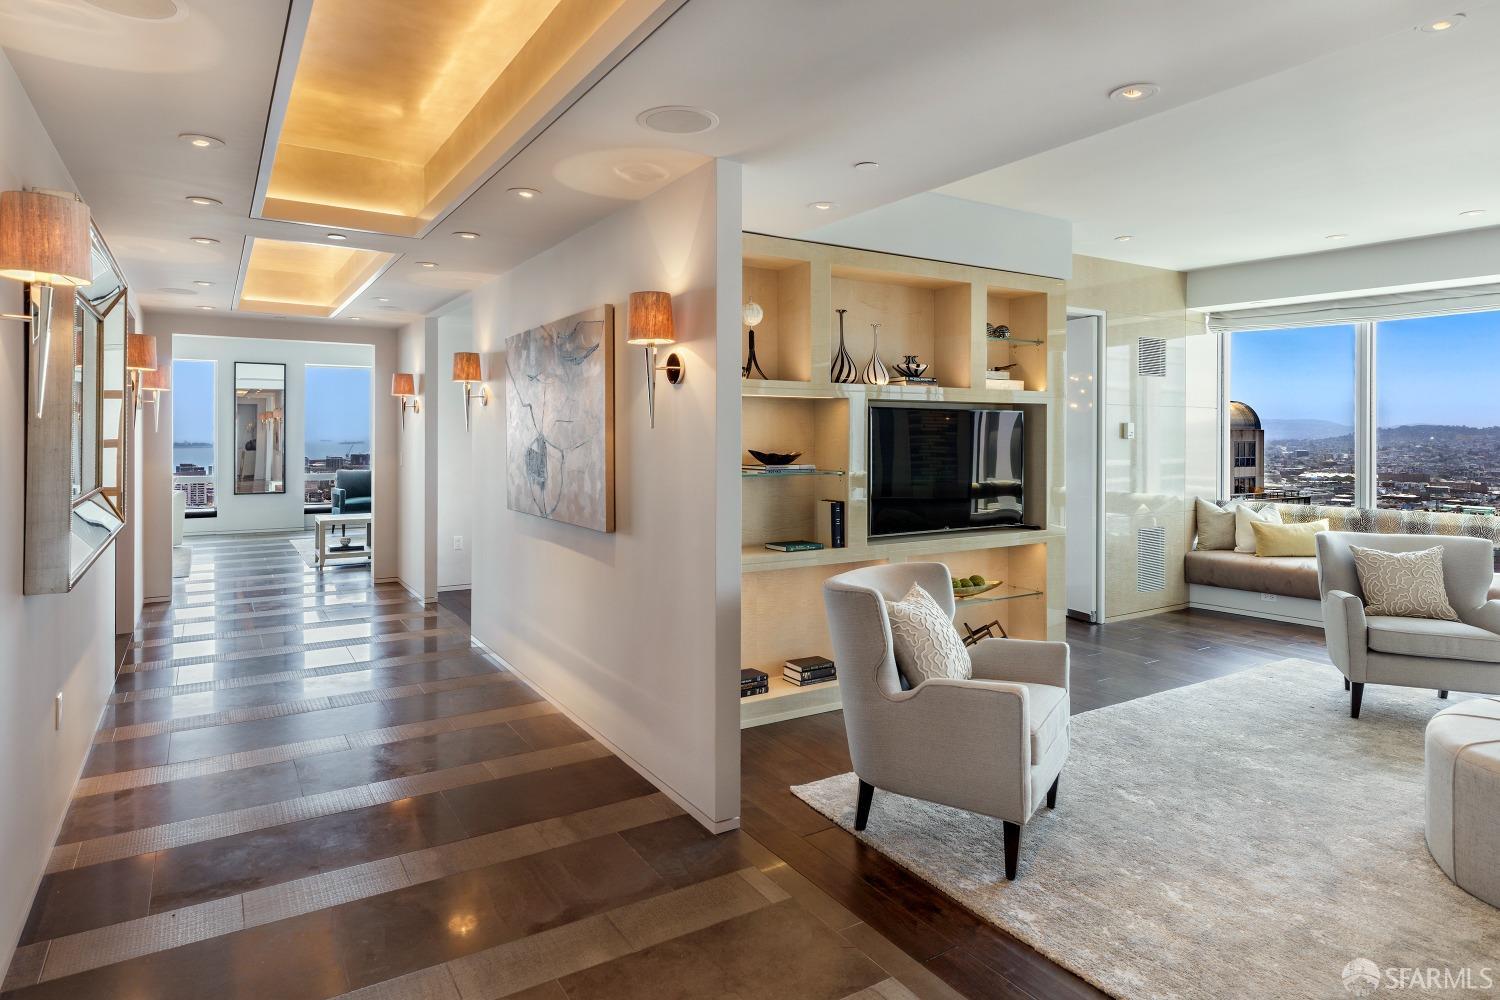 Just Reduced $2,900,000! Commandingly sited high in the iconic Four Seasons Hotel, this triple-mint 4BD, 4,550sf major view condominium boasts a large living room, open kitchen & family room, paneled office & view dining room. Oversized windows on three sides deliver captivating views of the sunrise over the San Francisco Bay, the dynamic Downtown skyline & sunset views toward City Hall & Twin Peaks. Extensively renovated by designer Jacques Saint Dizier & Muratore Construction, the substantial layout & elegantly proportioned rooms enable daily living & sophisticated entertaining. Advanced infrastructure includes Lutron lighting & shading and media/entertainment systems. Move-Right-In! Four Seasons #34A is the largest constructed condominium listed for sale downtown. 5-Star Four Seasons Hotel & Residences amenities include anticipatory concierge, doorman & security, 24/7 in-room dining, housekeeping, the exciting MKT restaurant & lounge, & the onsite 127,000sf Equinox fitness center. City living perfected!